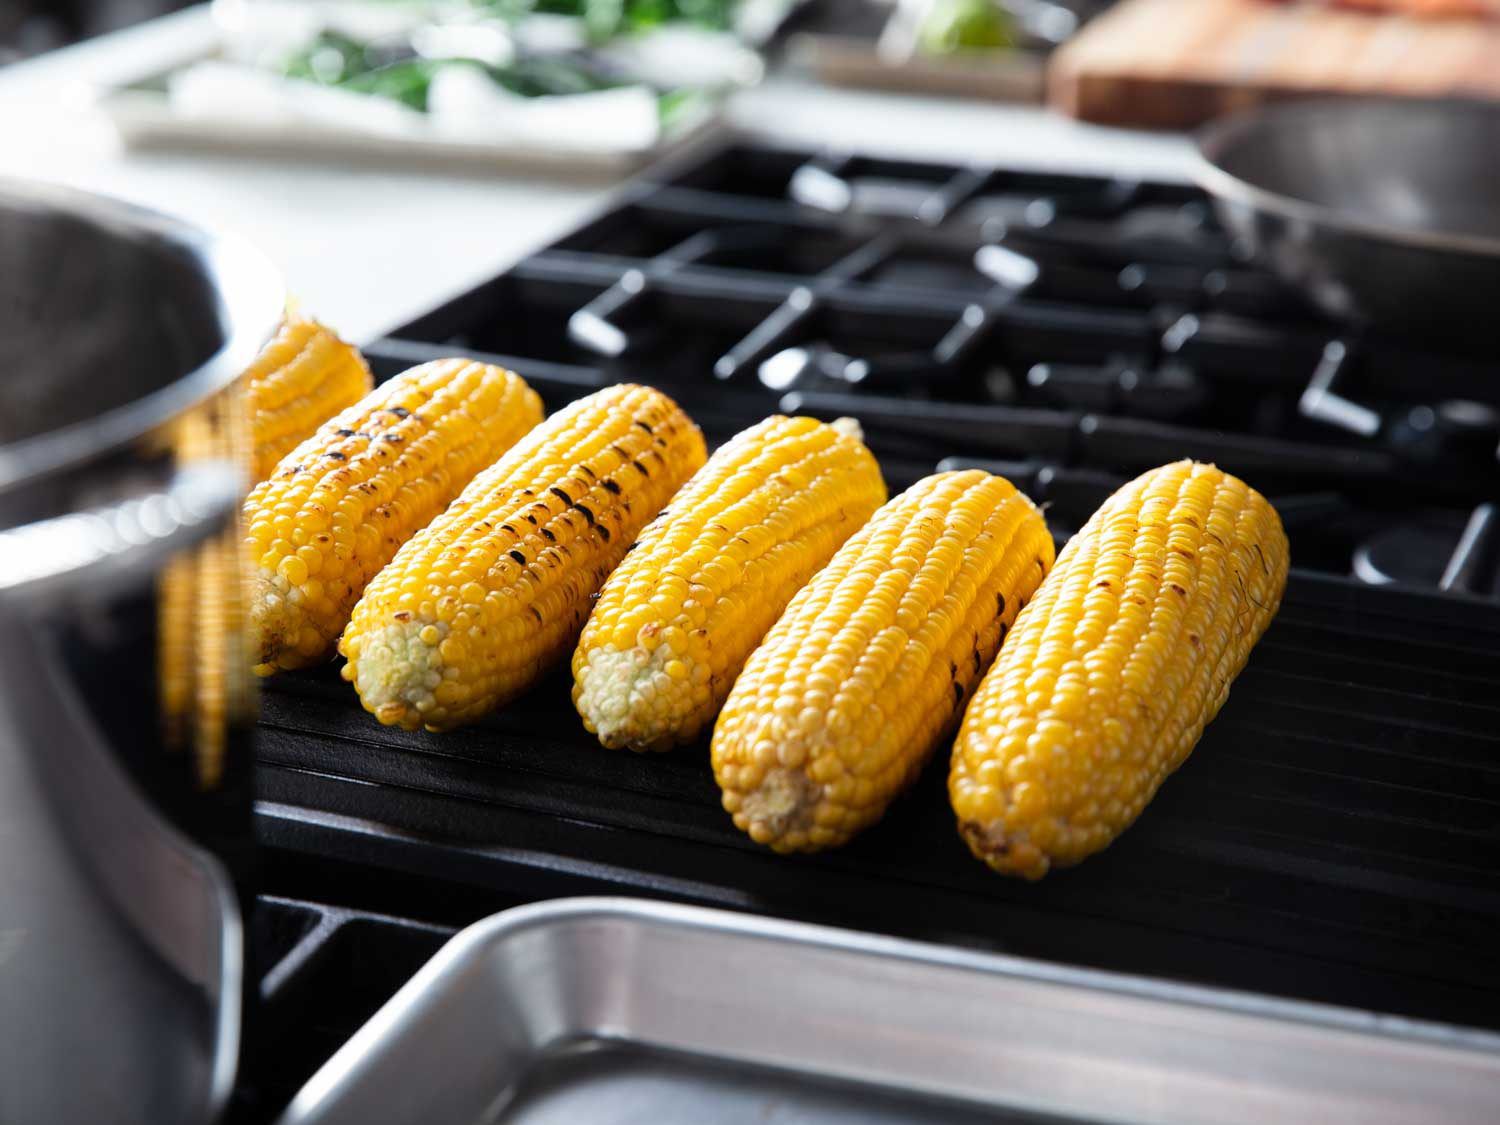 Ears of corn cooking on an indoor gas grill.